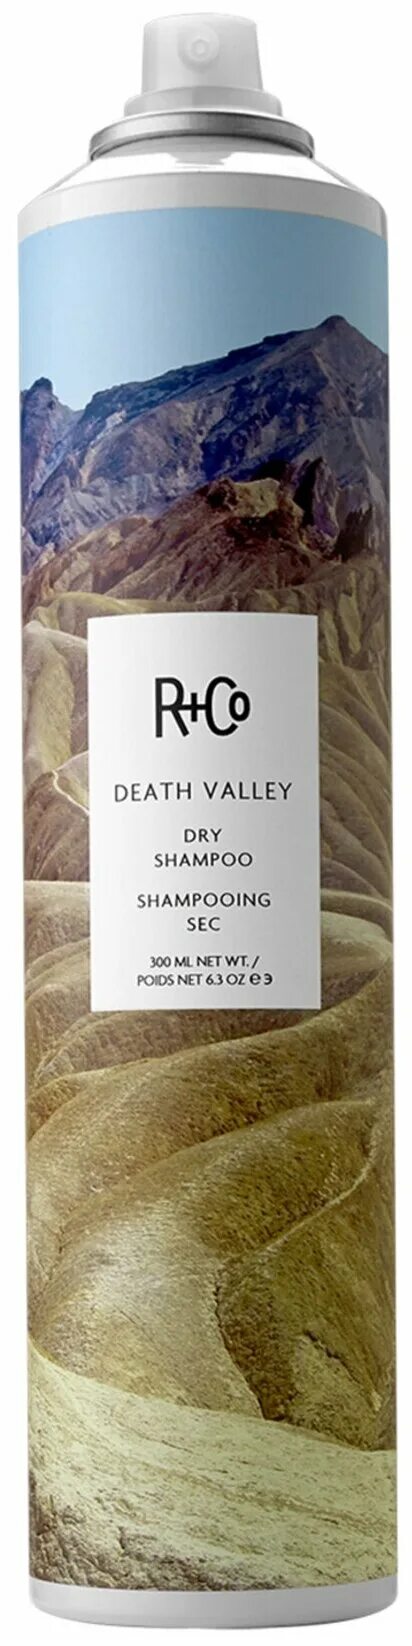 Death Valley Dry Shampoo;. R+co Death Valley Dry Shampoo. R+co Death Valley сухой шампунь. Сухой шампунь r+co спрей. Сухой шампунь r co